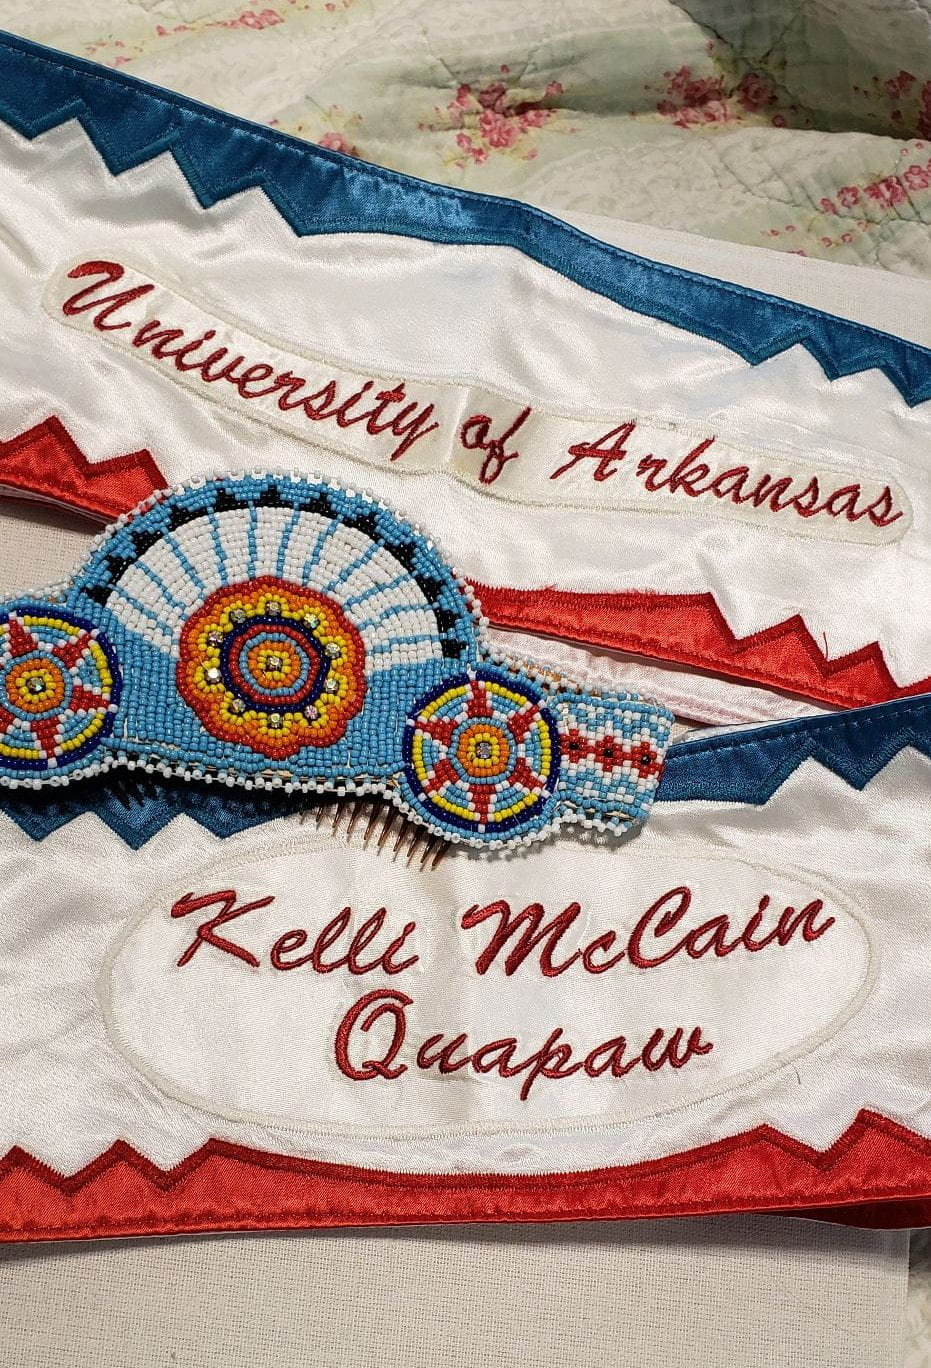 PowPow regalia laid out, including two sashs bordered with blue at the top, red at the bottom, and white in the middle. One says "University of Arkansas" and the other says "Kelli McCain Quapaw." There is also an intricately beaded crown with a blue background and three circular designs.